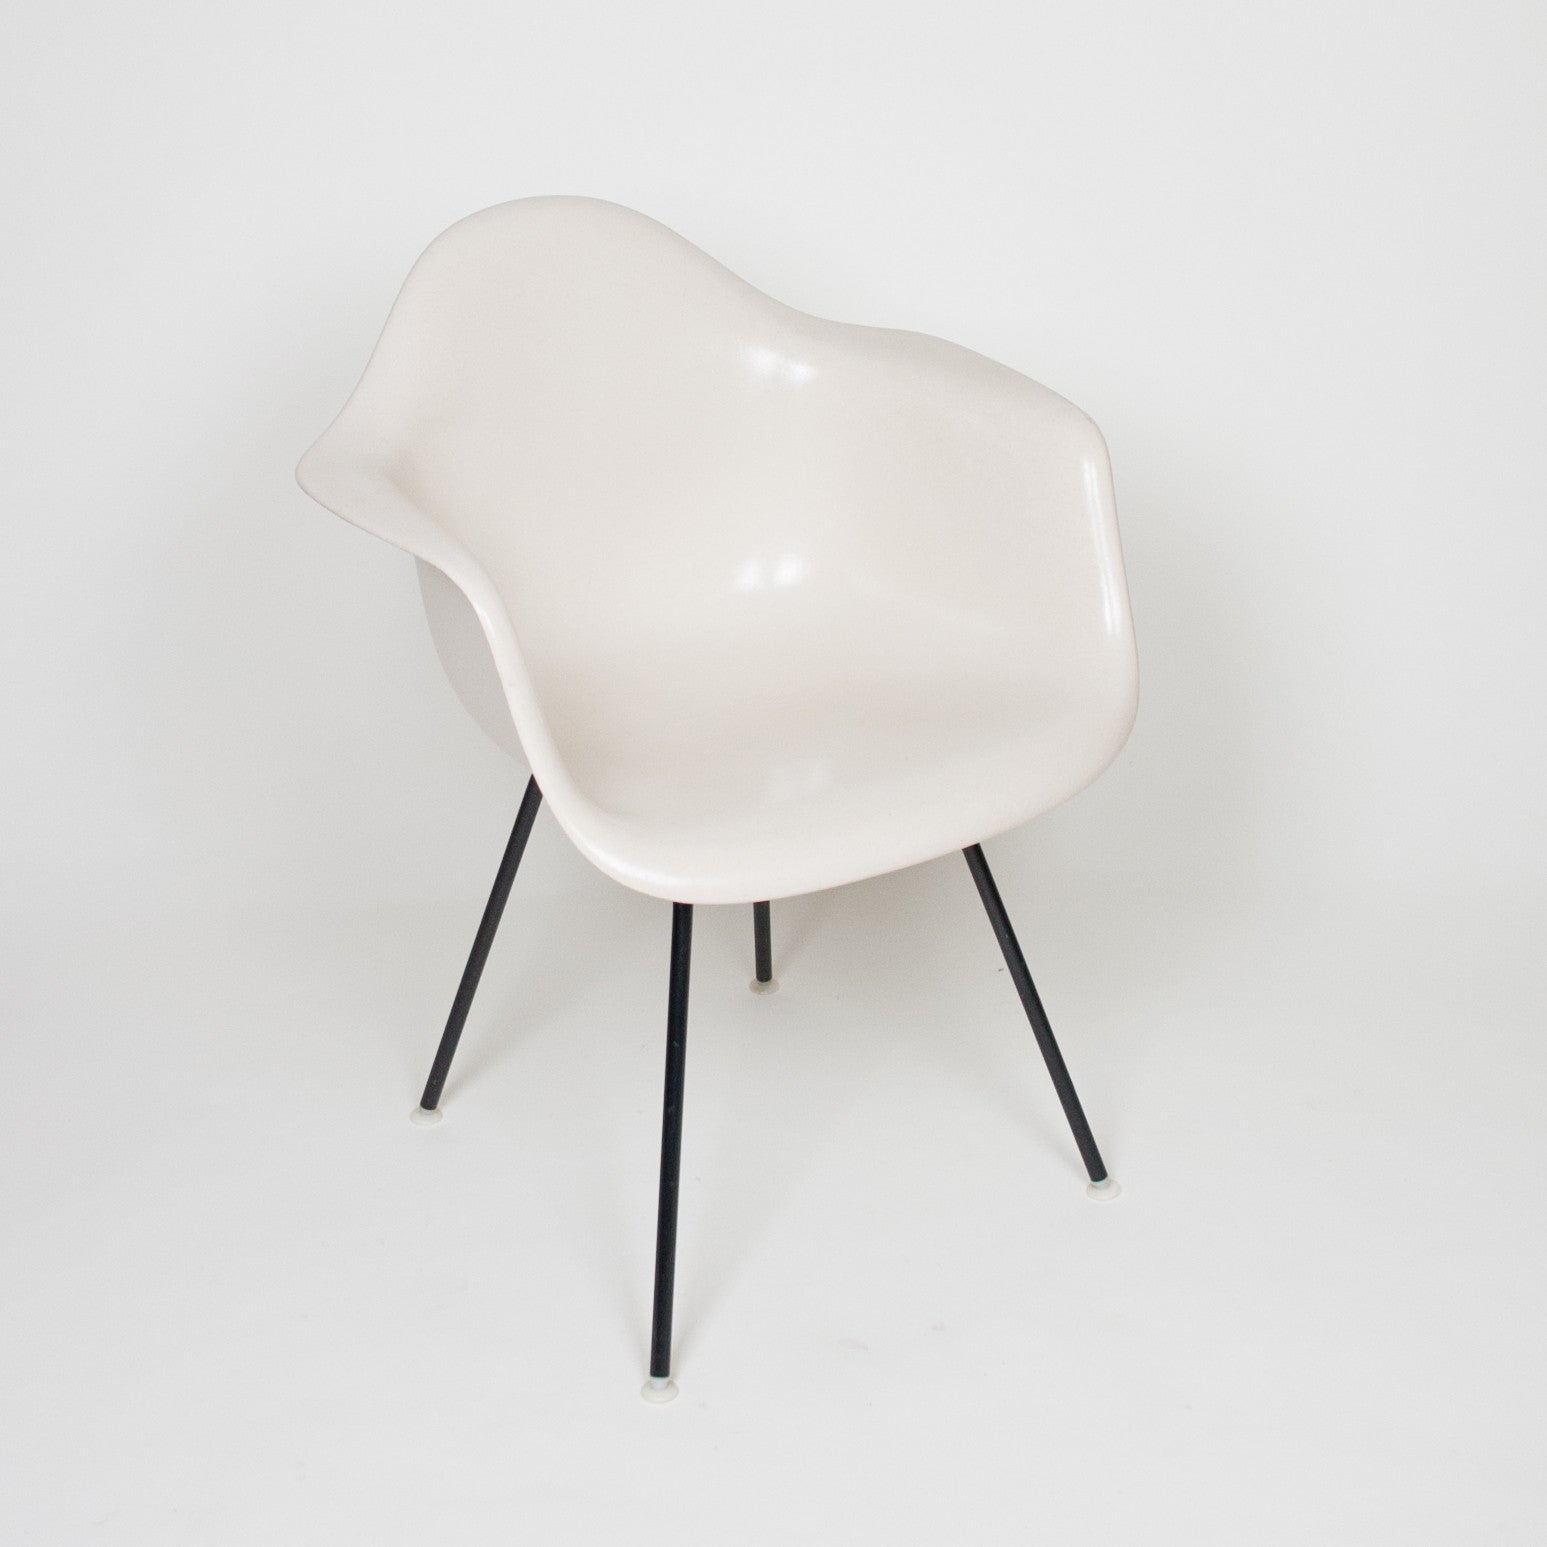 SOLD Eames Herman Miller Ivory Fiberglass Shell Chair Arm Shell Mint Condition